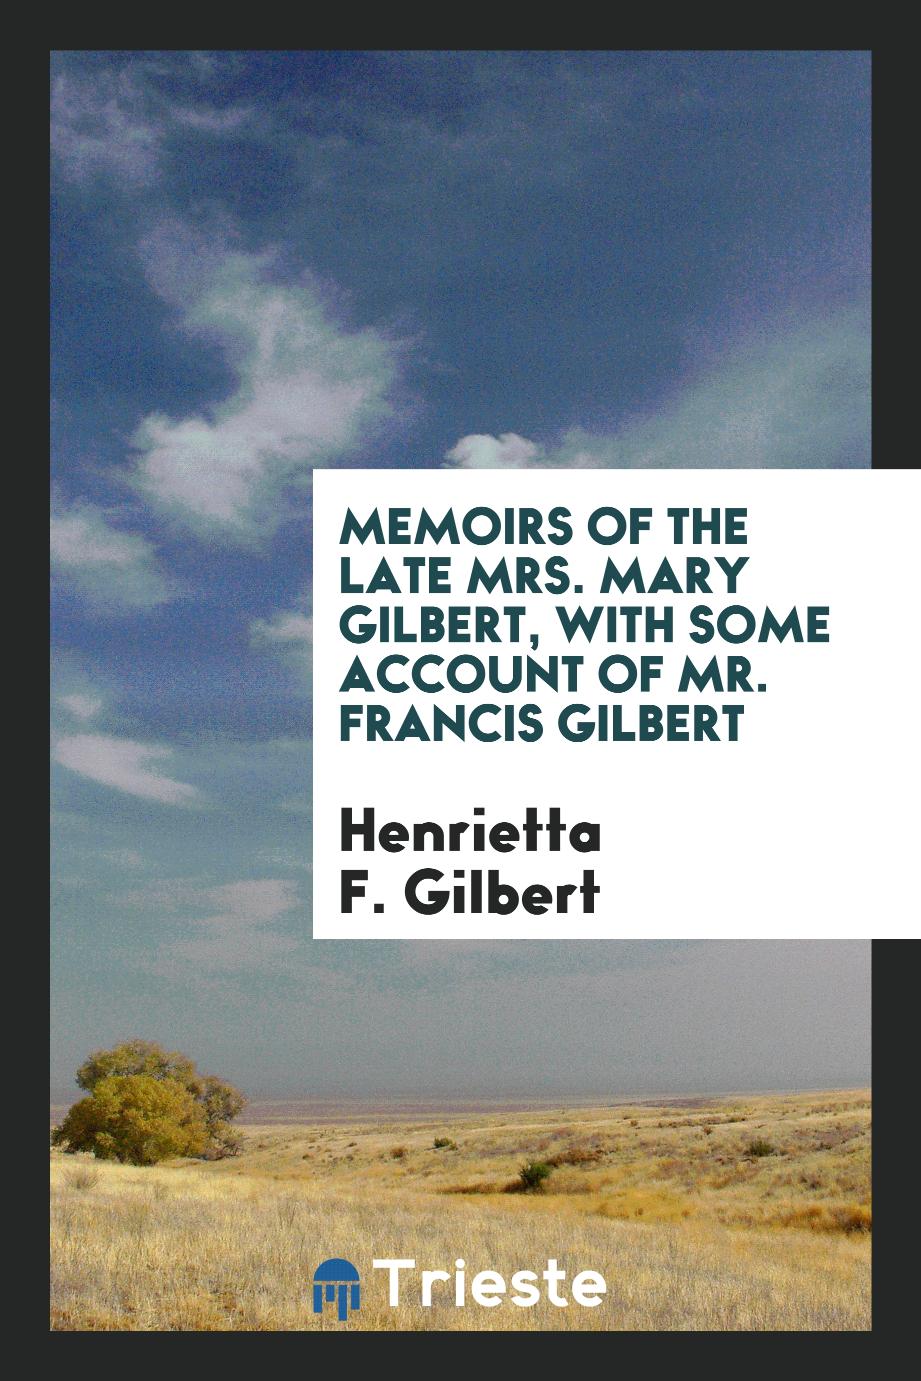 Memoirs of the late mrs. Mary Gilbert, with some account of mr. Francis Gilbert